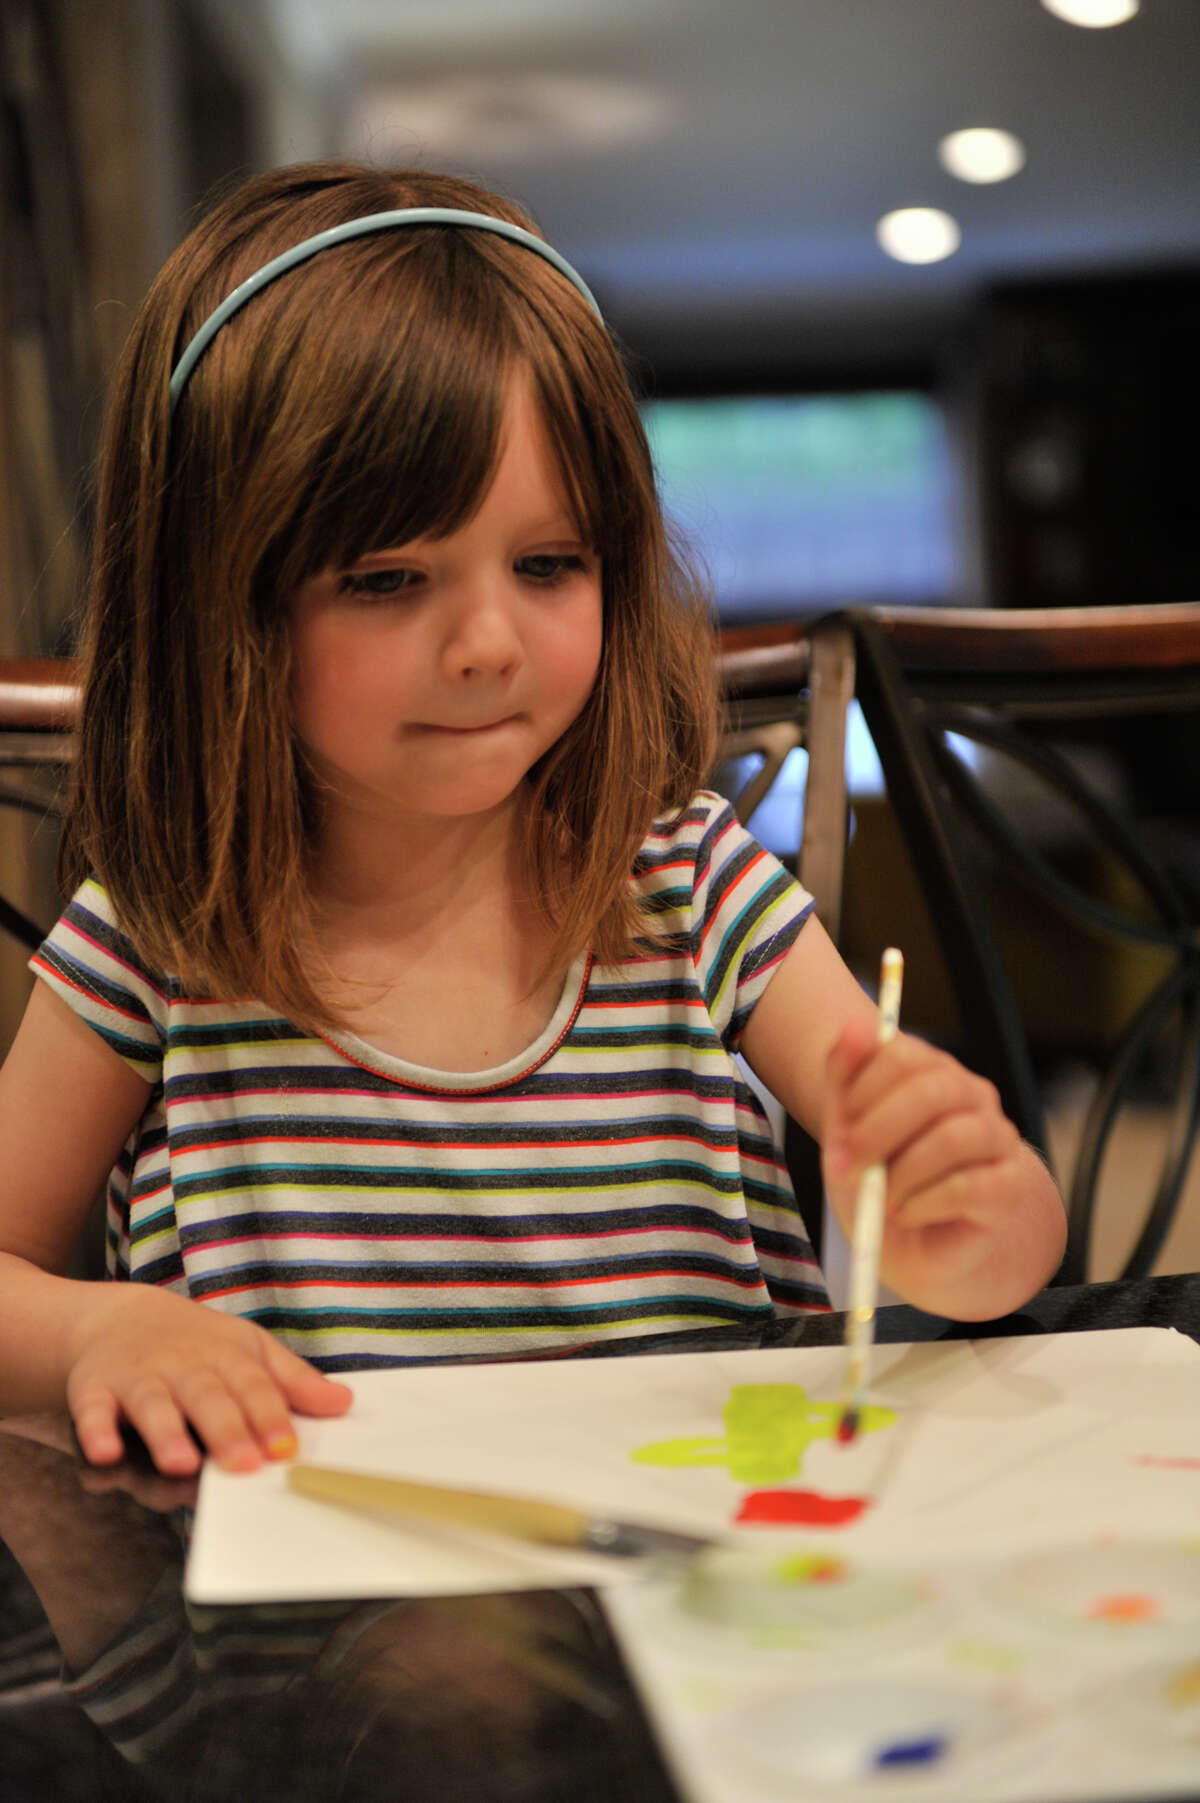 Sloane Sutherland, 5, paints in the kitchen of her home. Her mother delayed her entry into kindergarten by one year.